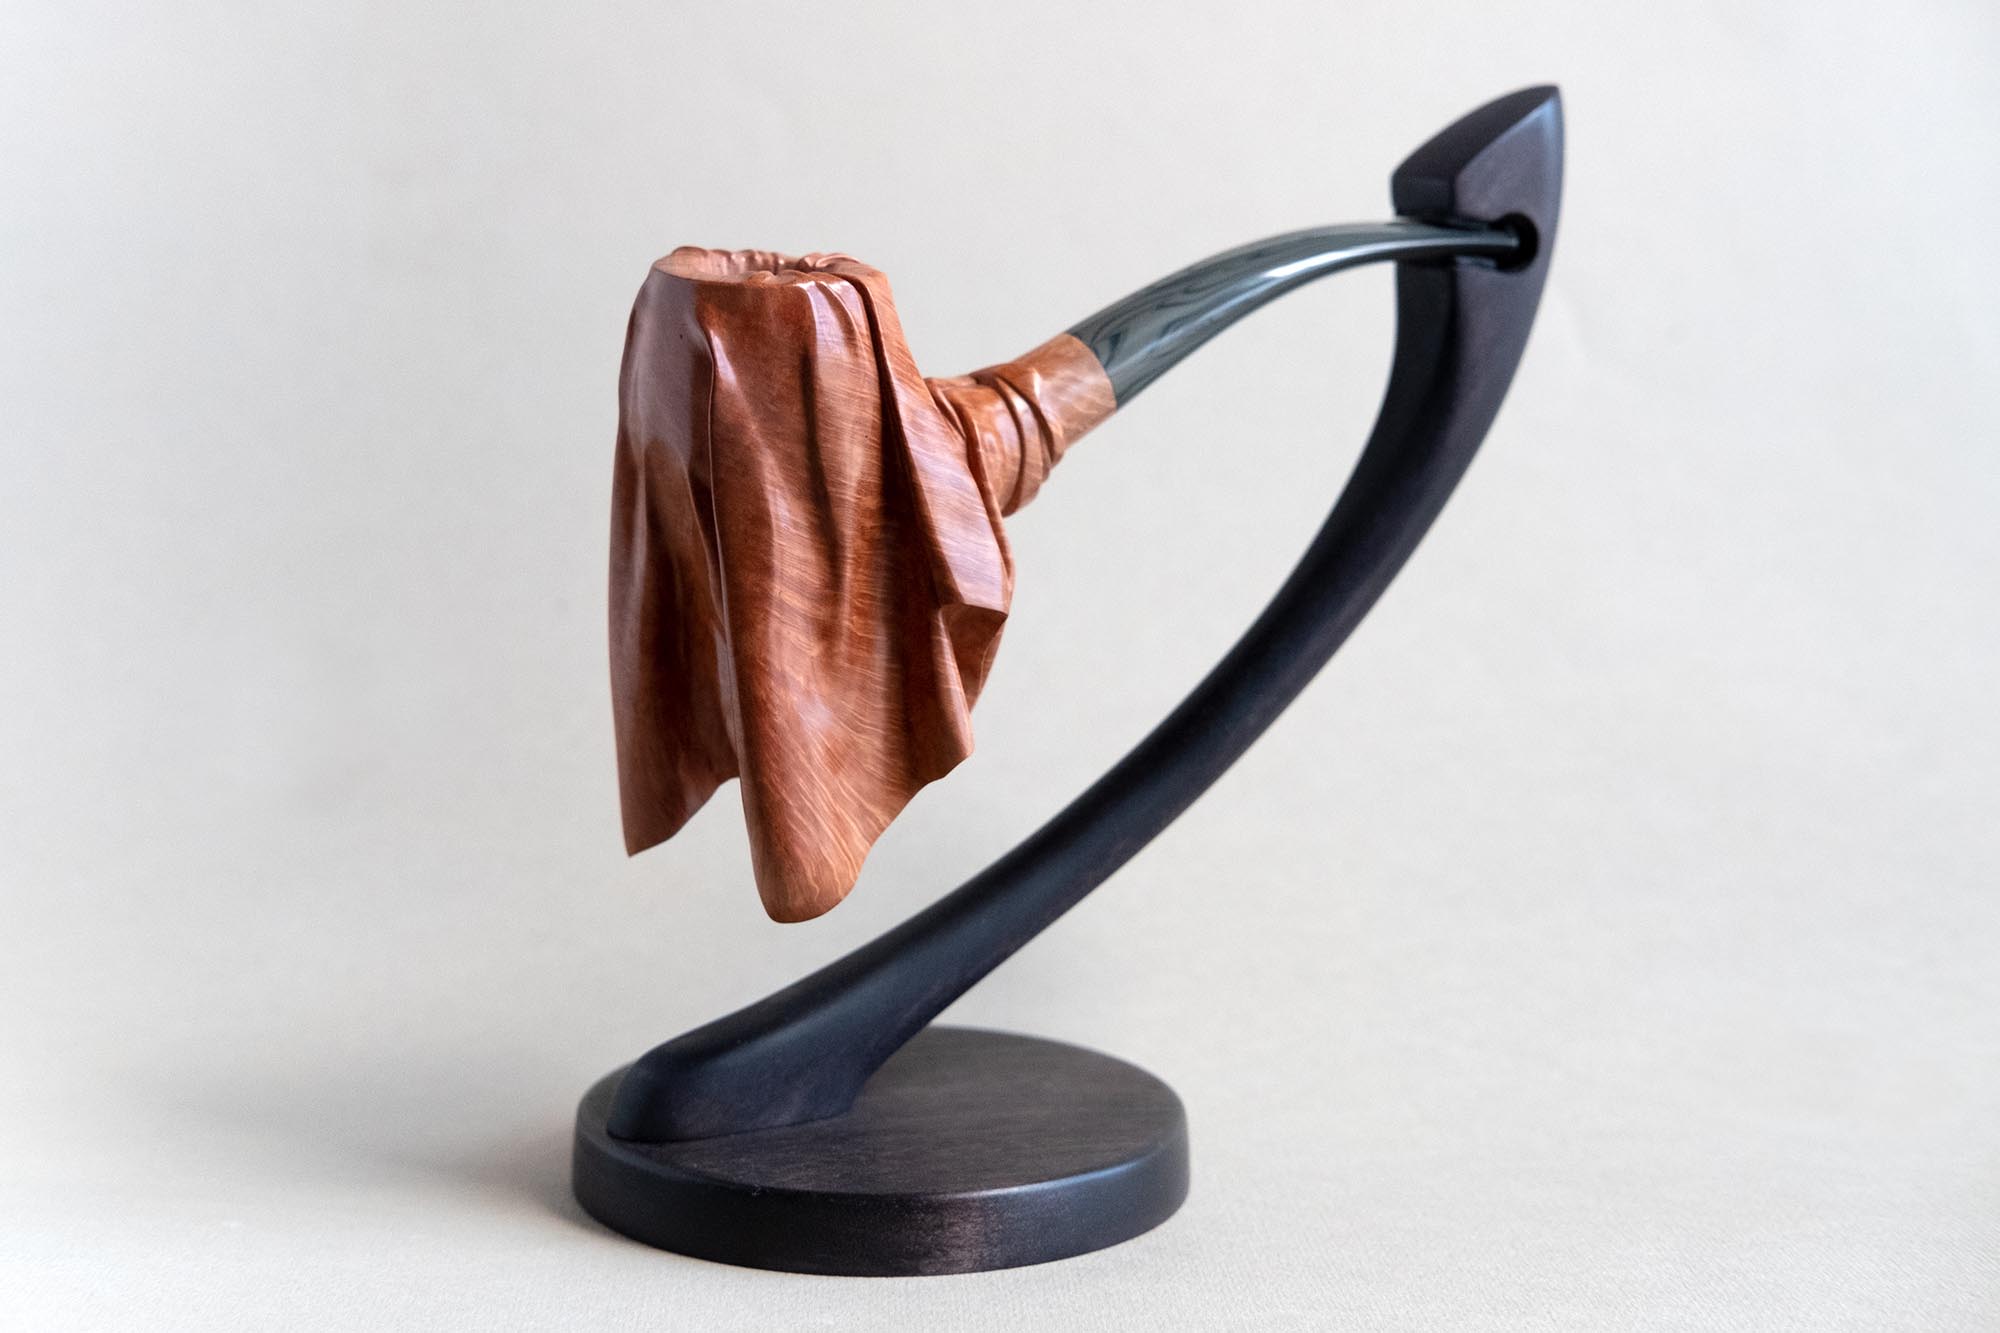 The Veiled pipe, a sculptural smoking pipe hand crafted by Arcangelo Ambrosi